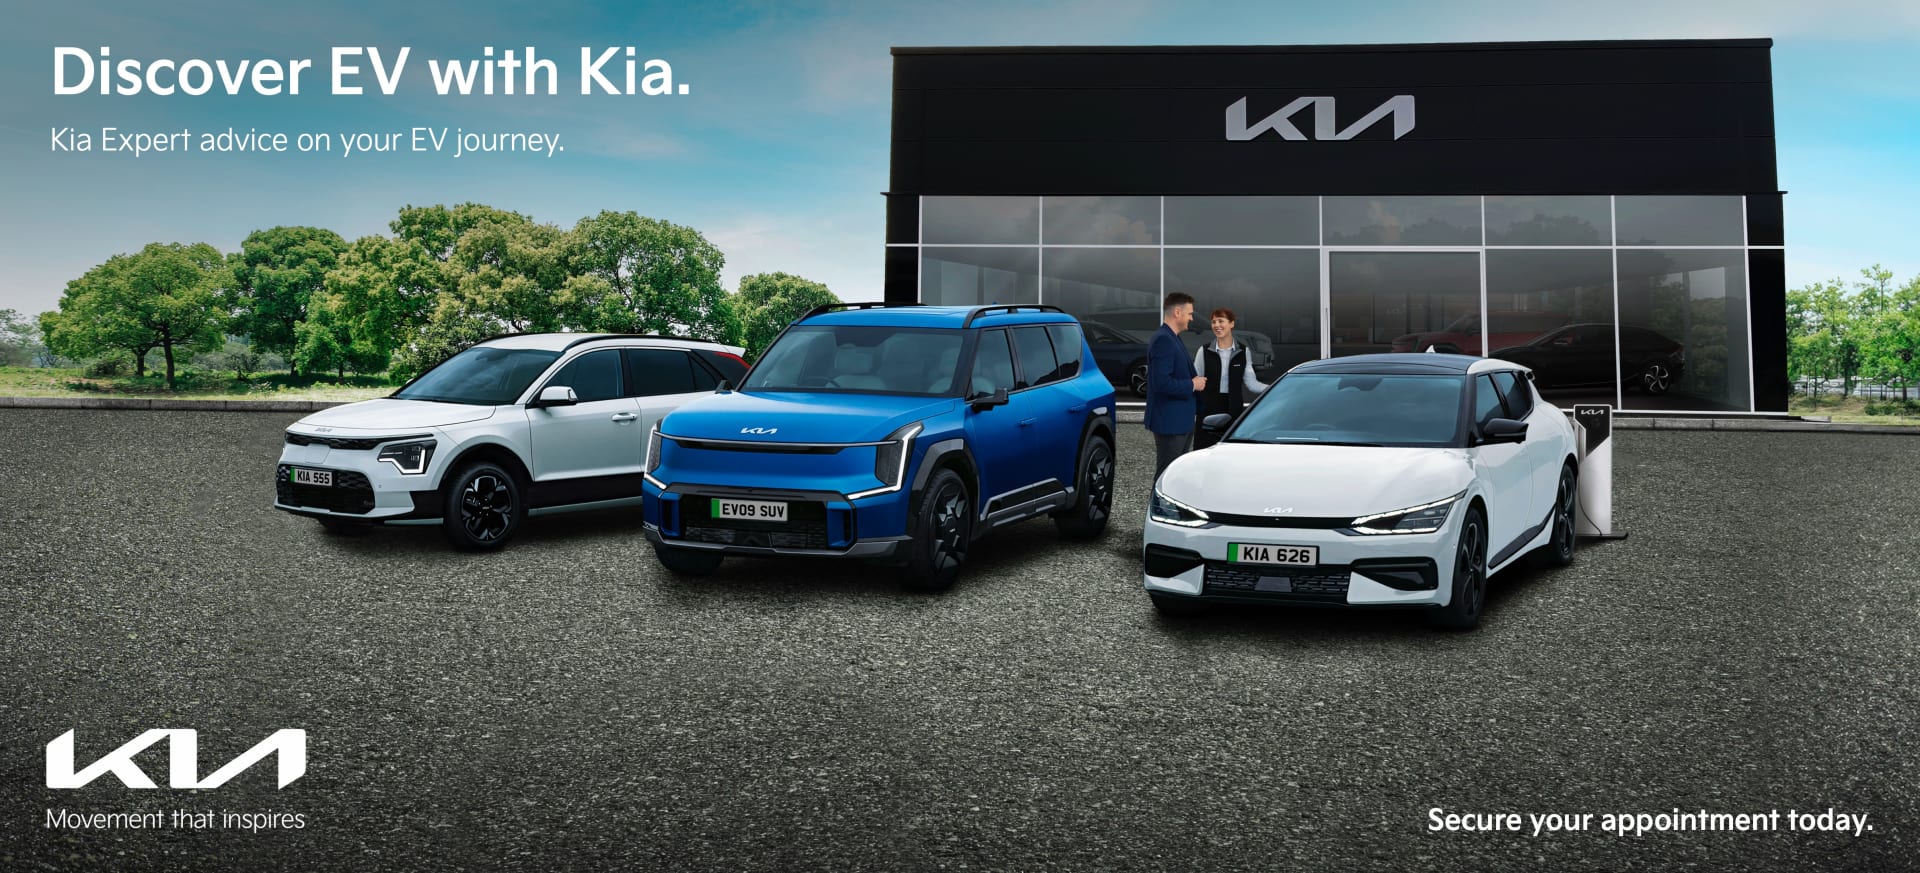 Discover EV with Kia at Park's Motor Group